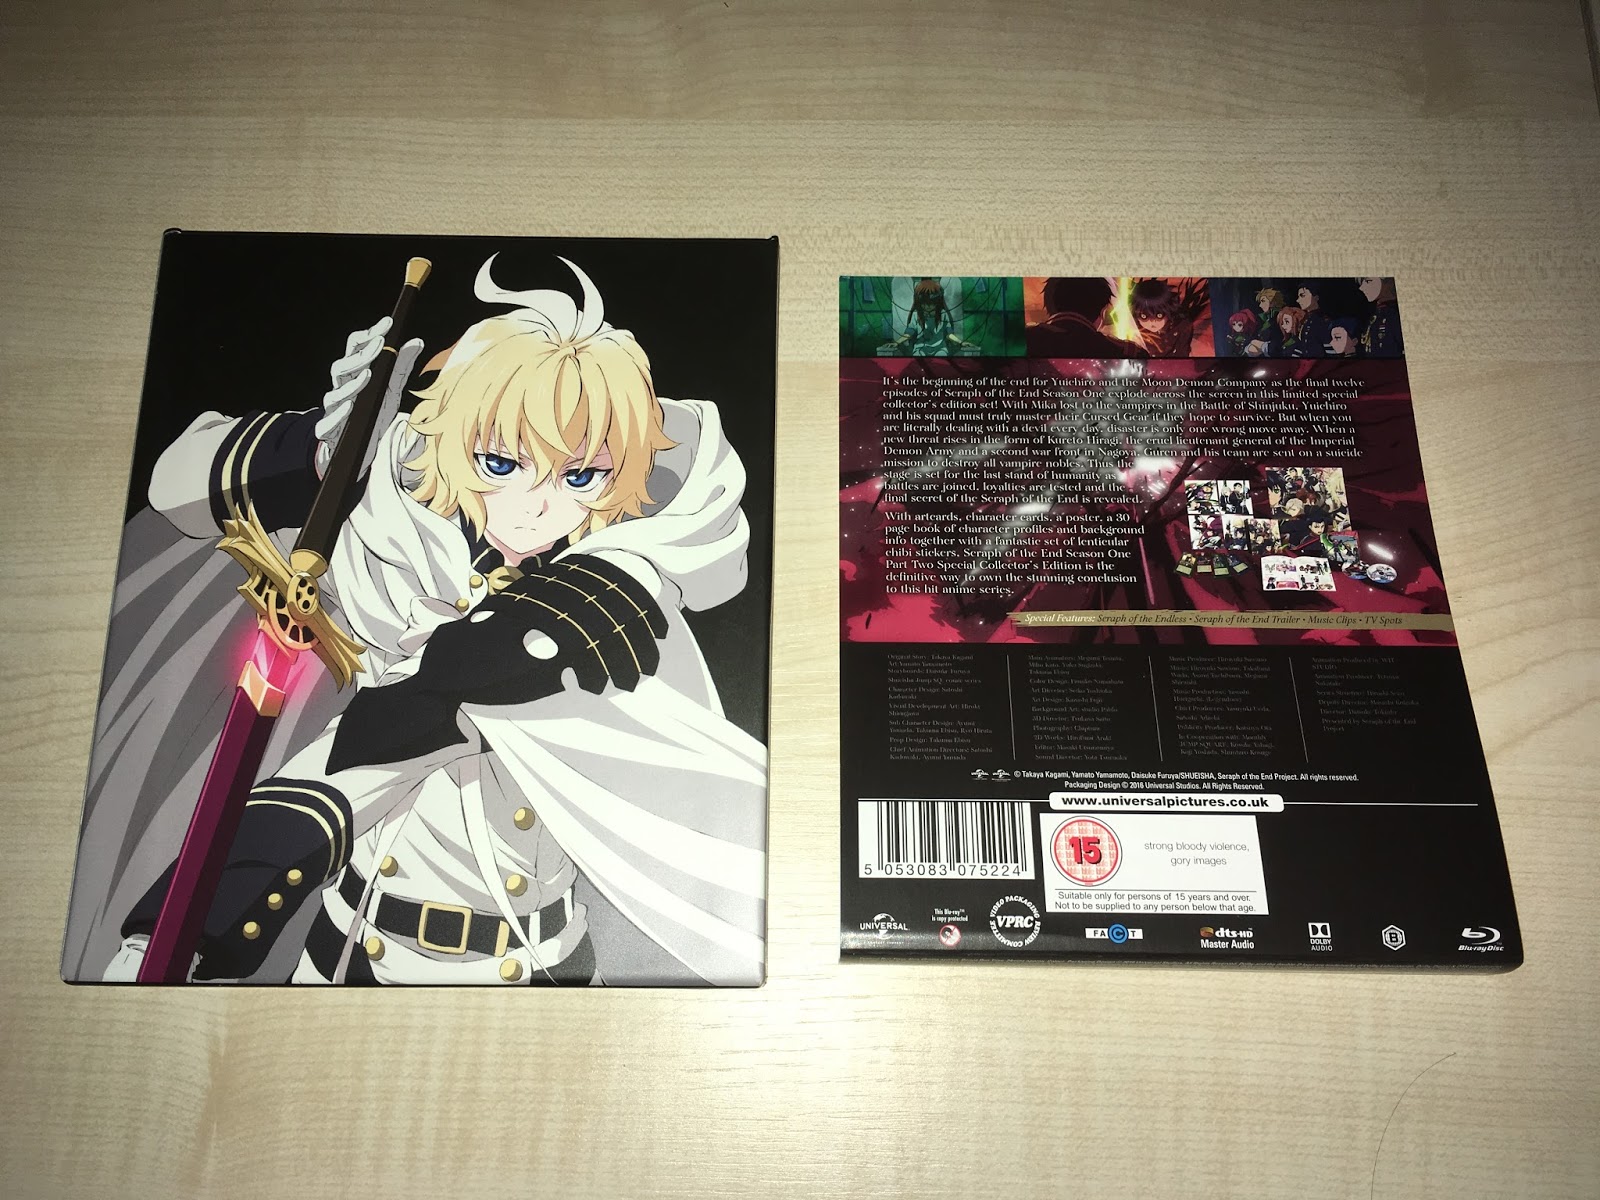 The Normanic Vault: Unboxing [UK]: Absolute Duo - Complete Series (BD/DVD)